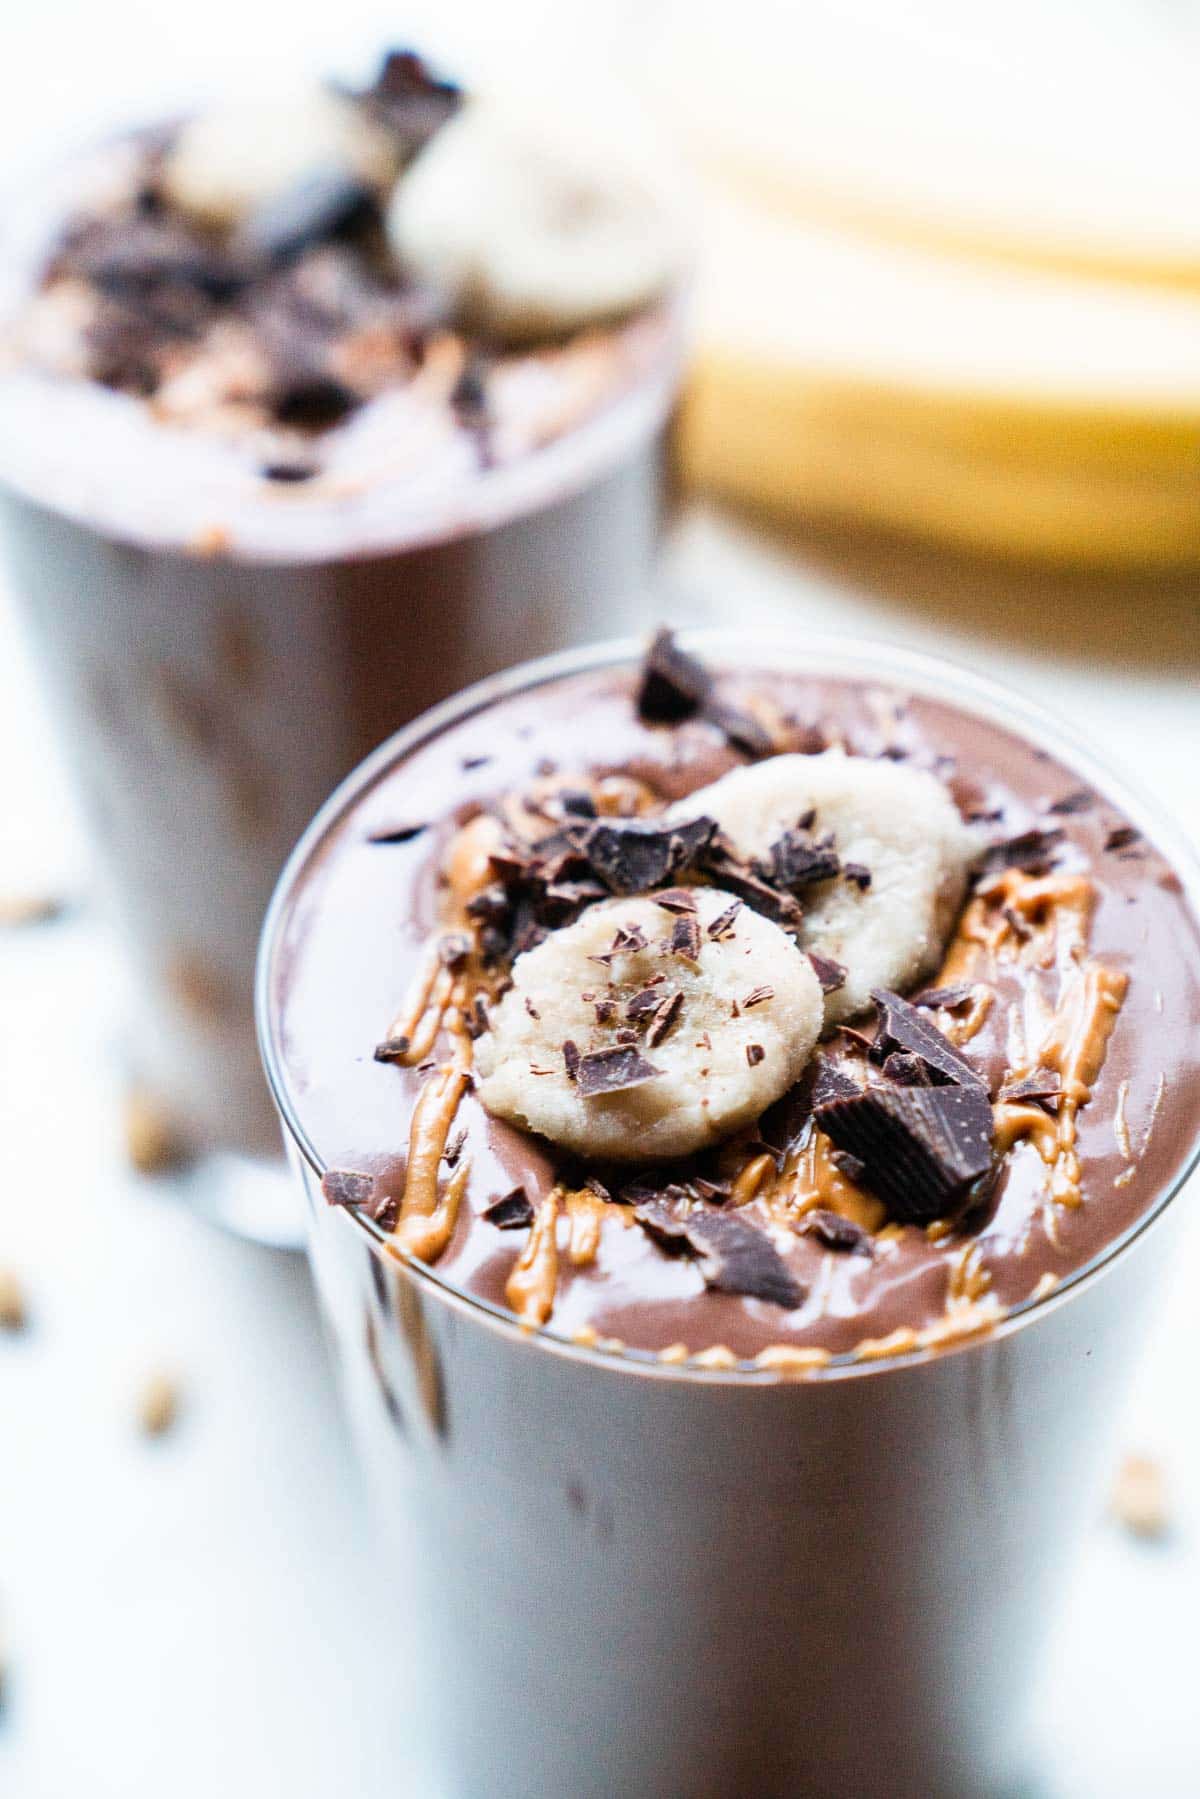 Two chocolate banana protein shakes topped with chocolate shavings and peanut butter.